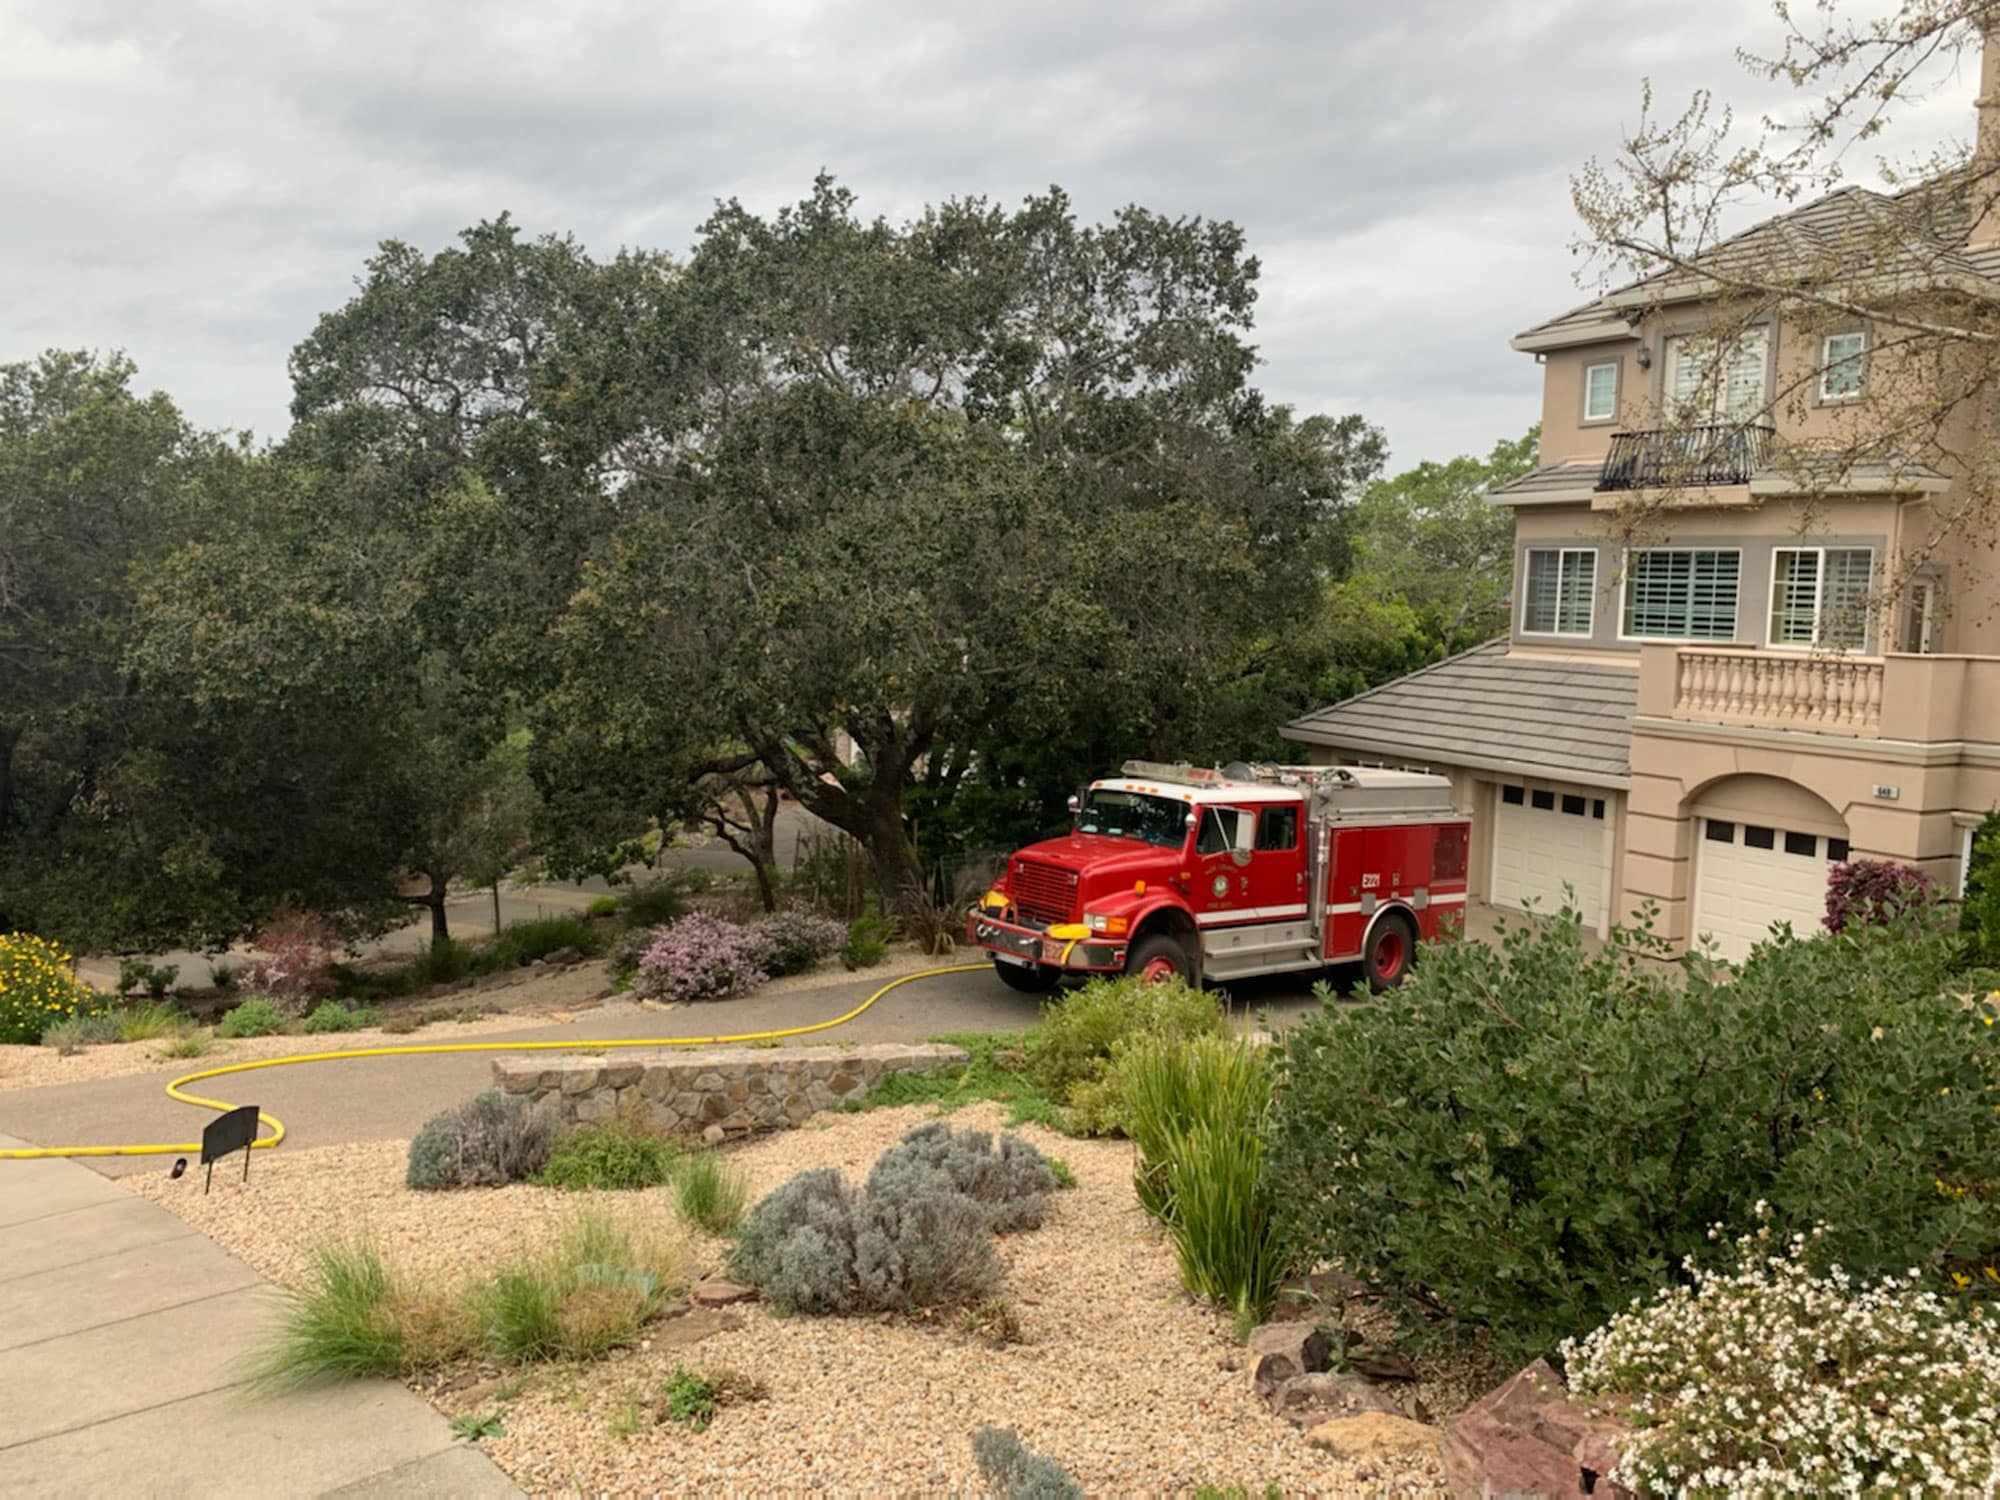 Fire truck rig parked in driveway of home